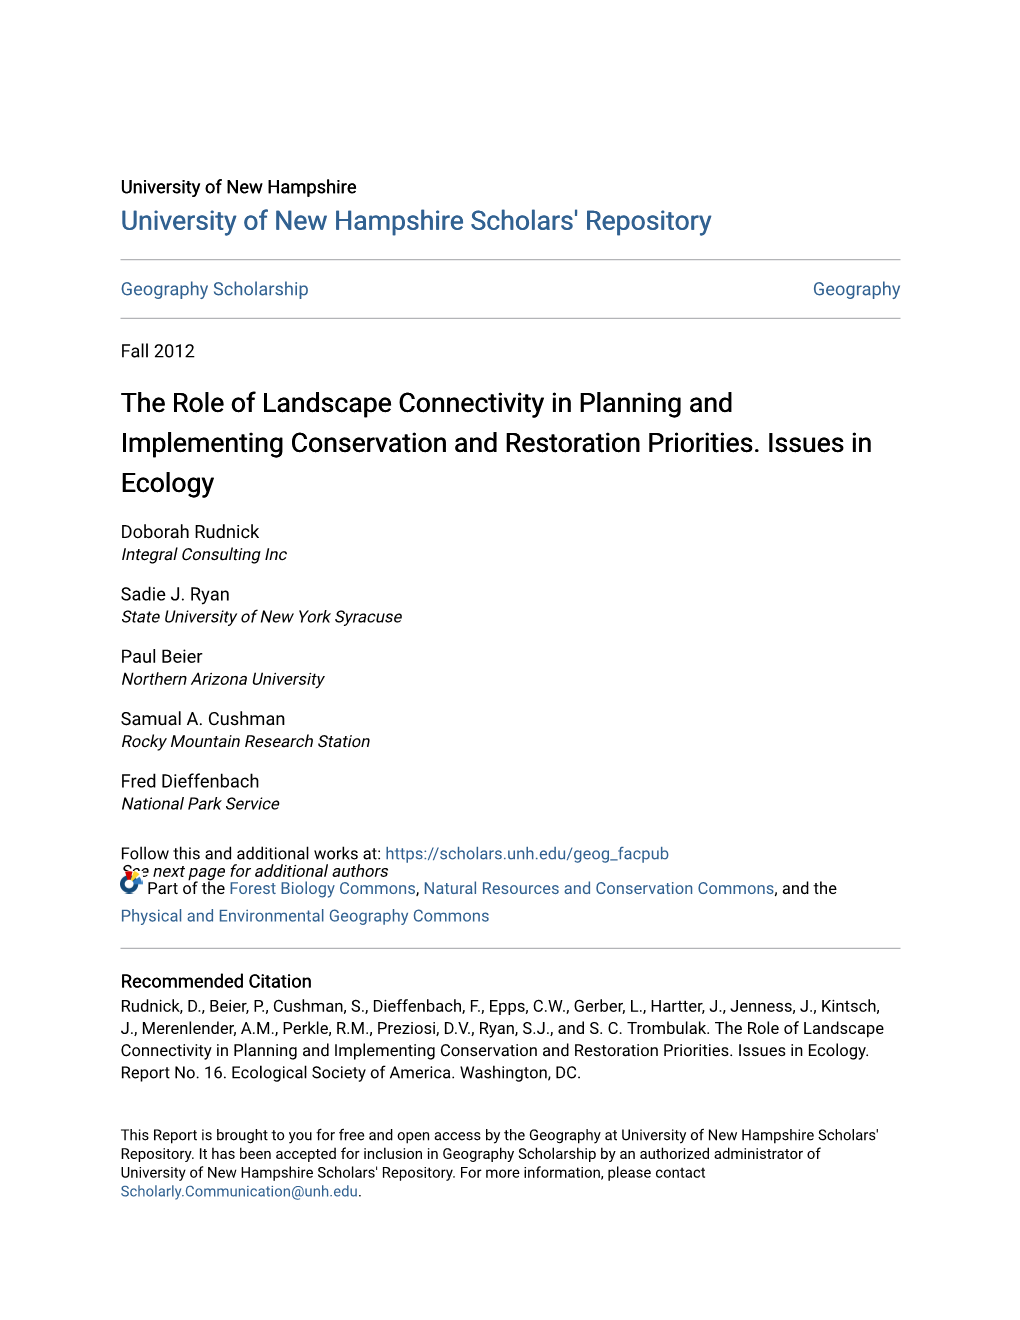 The Role of Landscape Connectivity in Planning and Implementing Conservation and Restoration Priorities